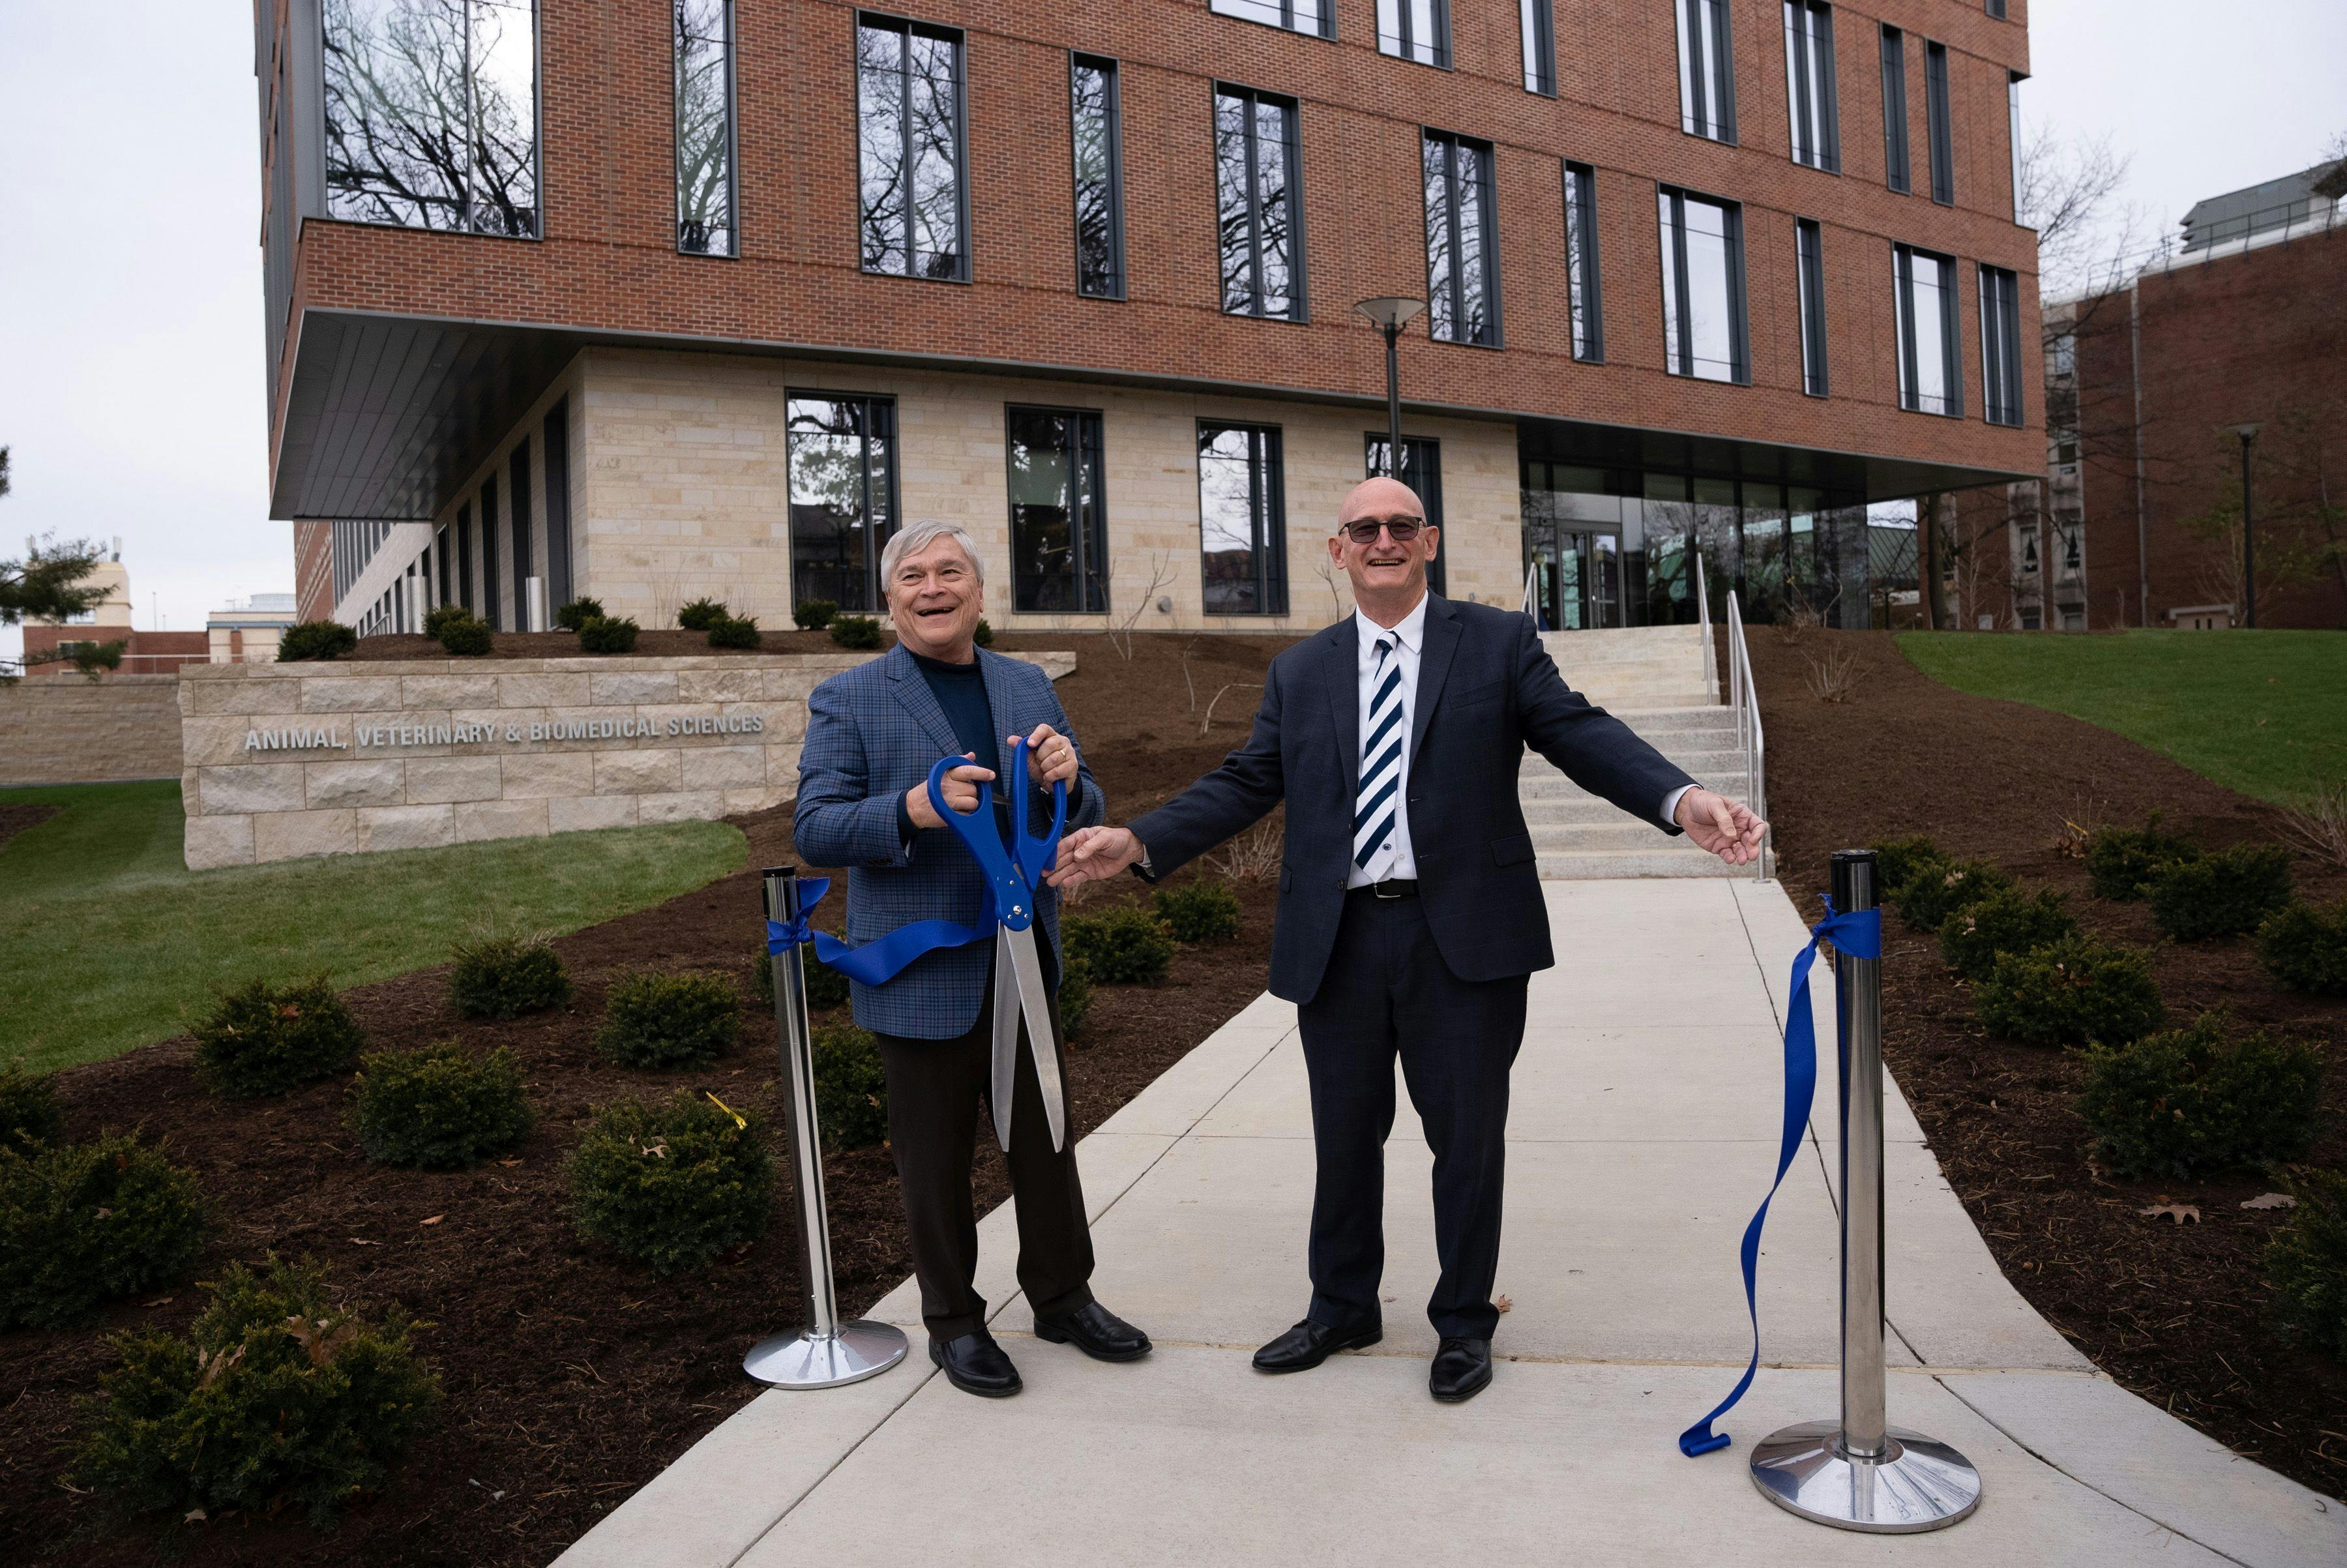 Penn State president, Eric Barron, left, and College of Agricultural Sciences dean Rick Roush share a laugh after cutting the ribbon marking the opening of the Animal, Veterinary and Biomedical Sciences Building (Photo courtesy of Michael Houtz, College of Agricultural Sciences, Penn State). 